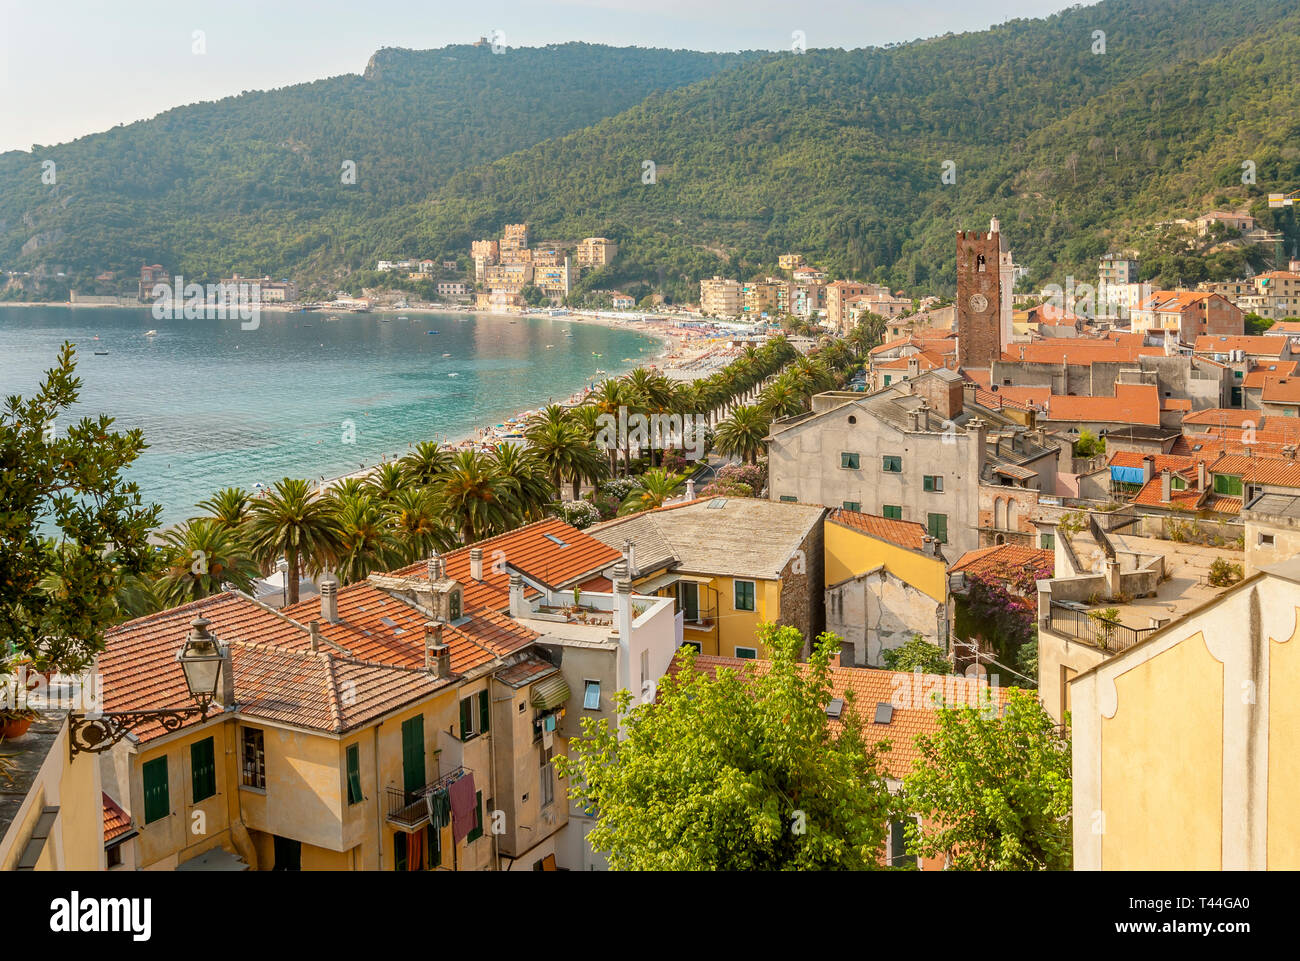 View over Noli at the Ligurian Coast, North West Italy Stock Photo